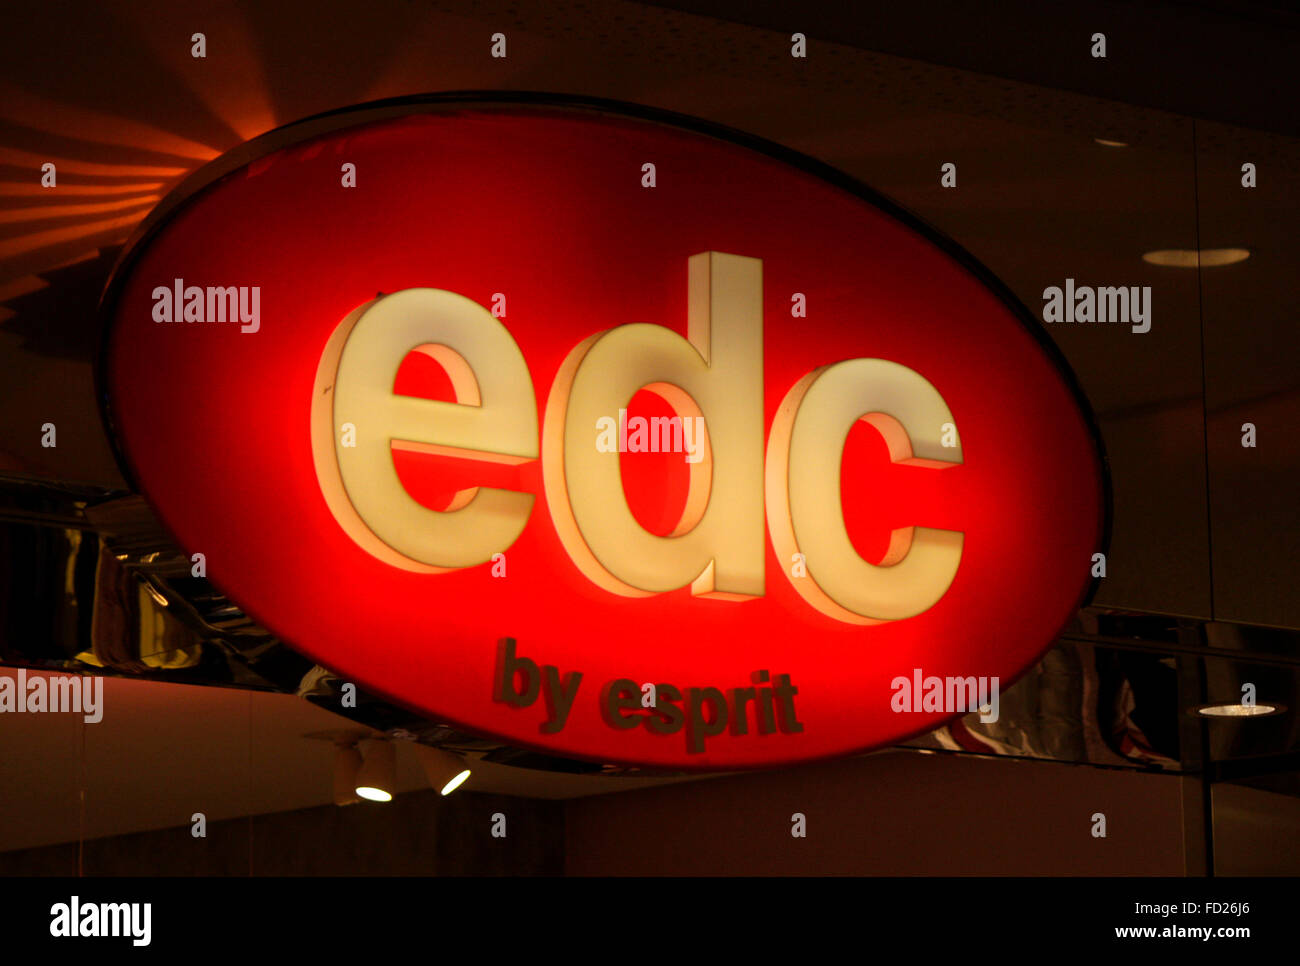 Edc Logo High Resolution Stock Photography and Images - Alamy